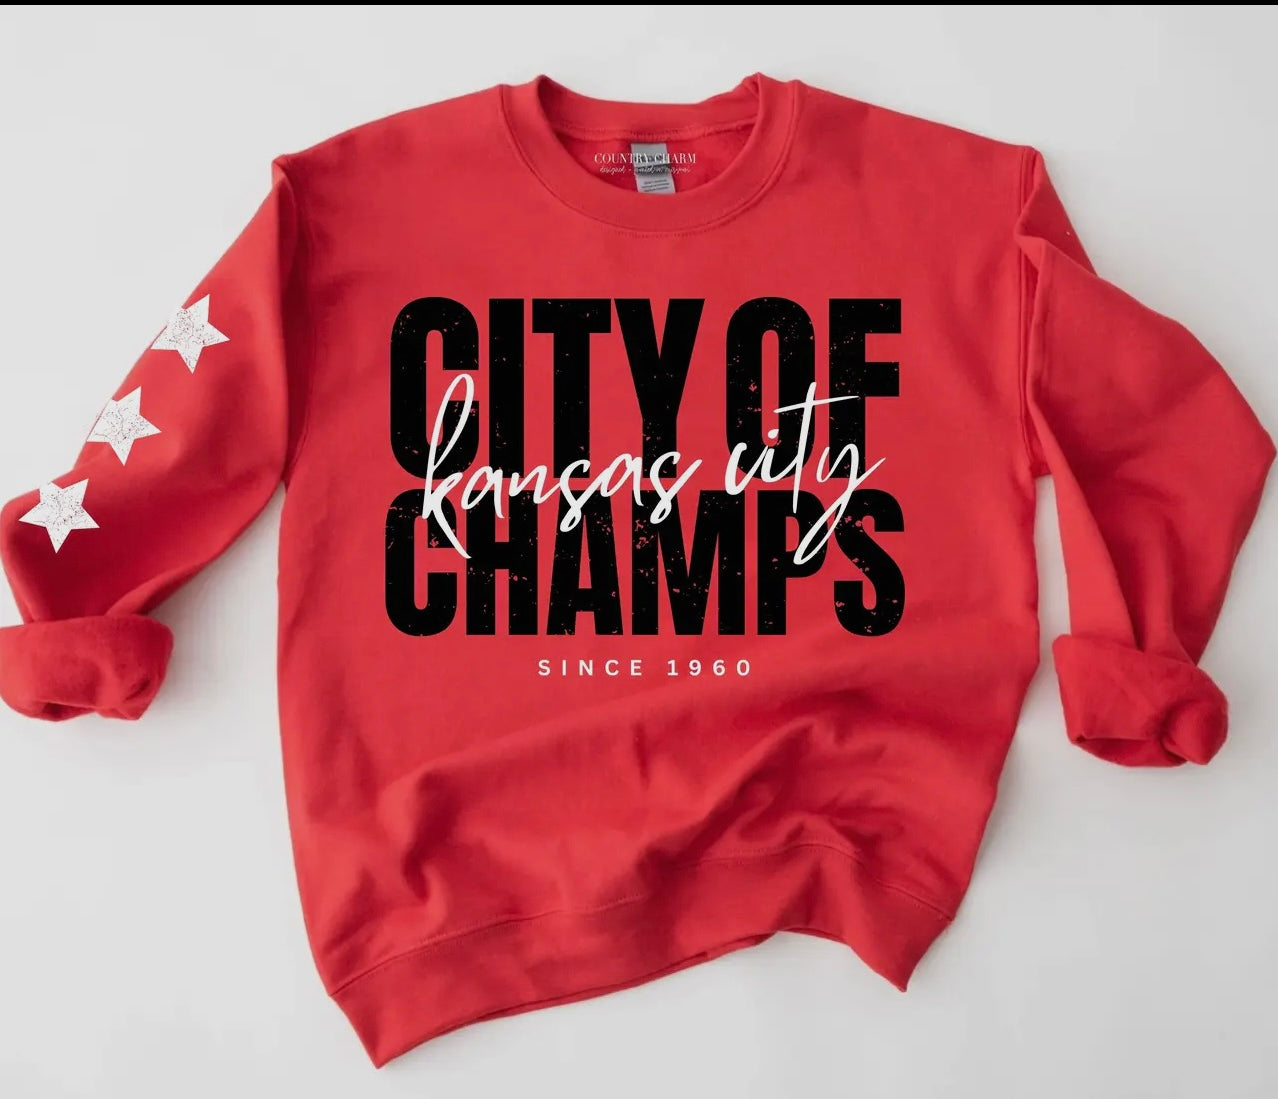 City of champs